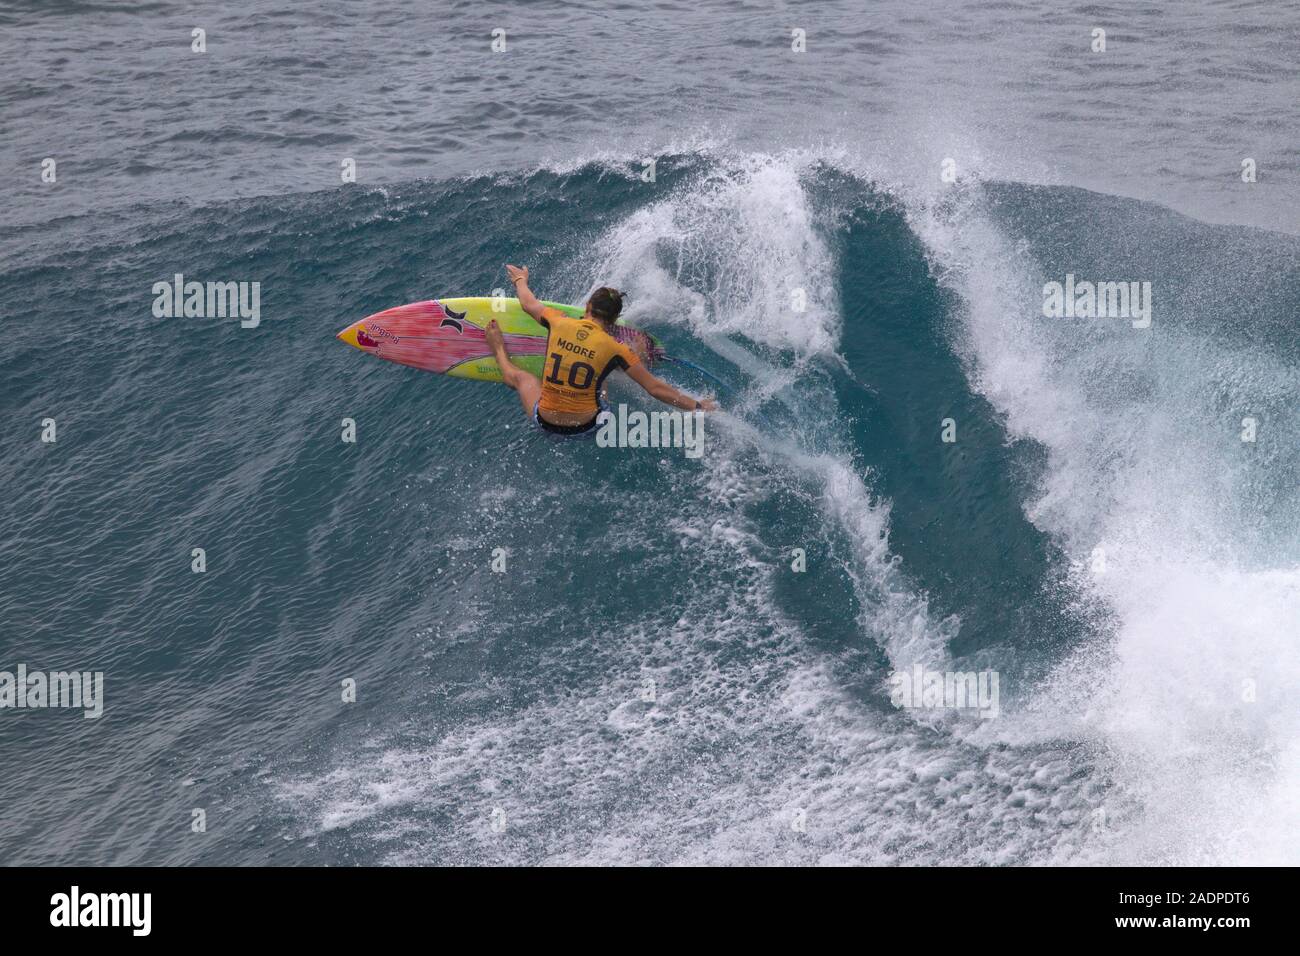 Carissa Moore winning the 2019 Women's surfing title at the Maui Pro Surf competition. Stock Photo